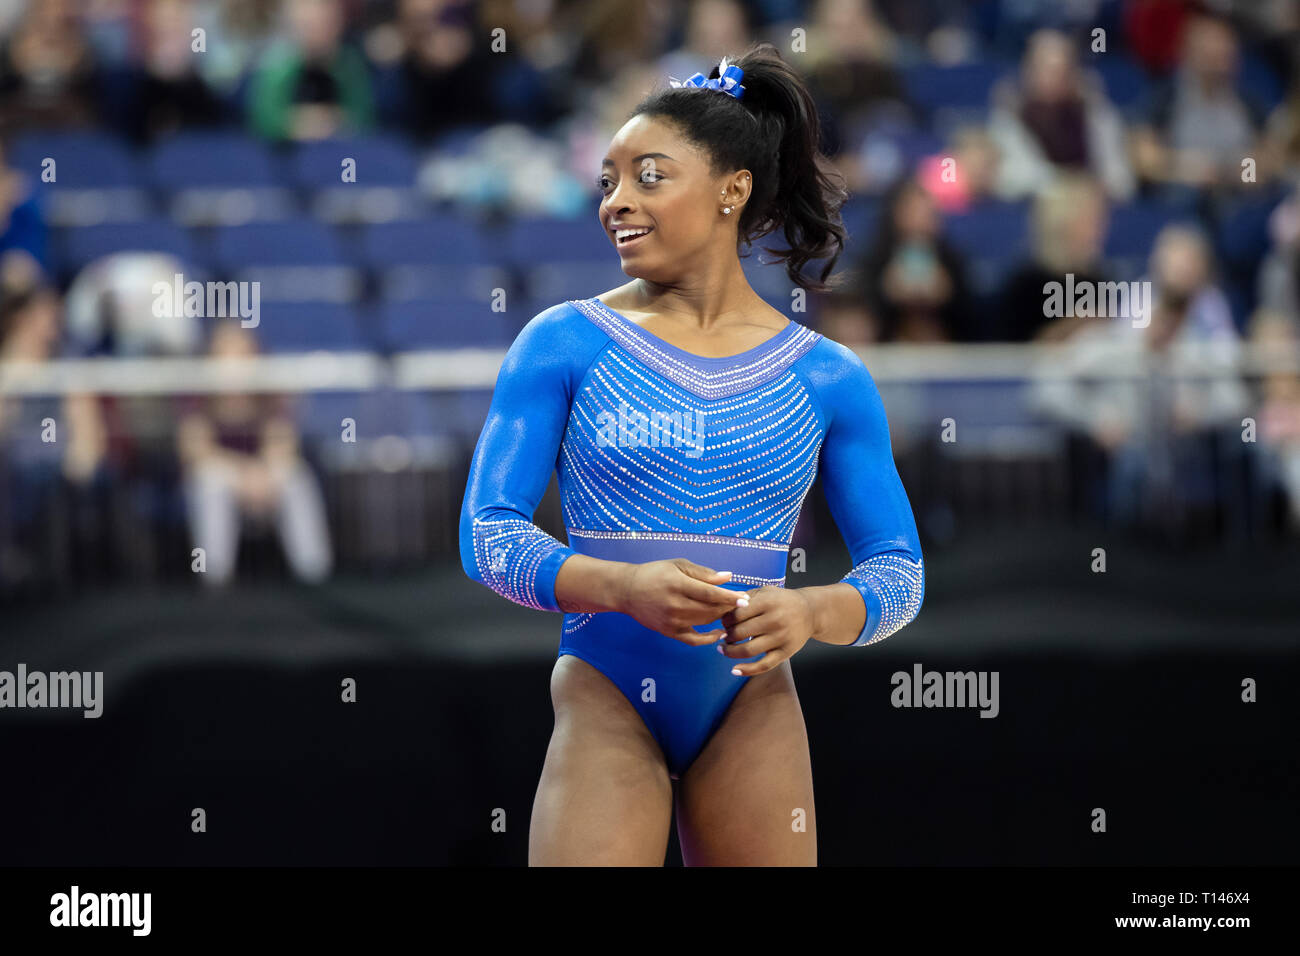 London, UK. 23rd March, 2019. Simone biles of USA during the Matchroom Multisport presents the 2019 Superstars of Gymnastics at The O2 Arena on Saturday, 23 March 2019. LONDON ENGLAND. Credit: Taka G Wu/Alamy News Stock Photo